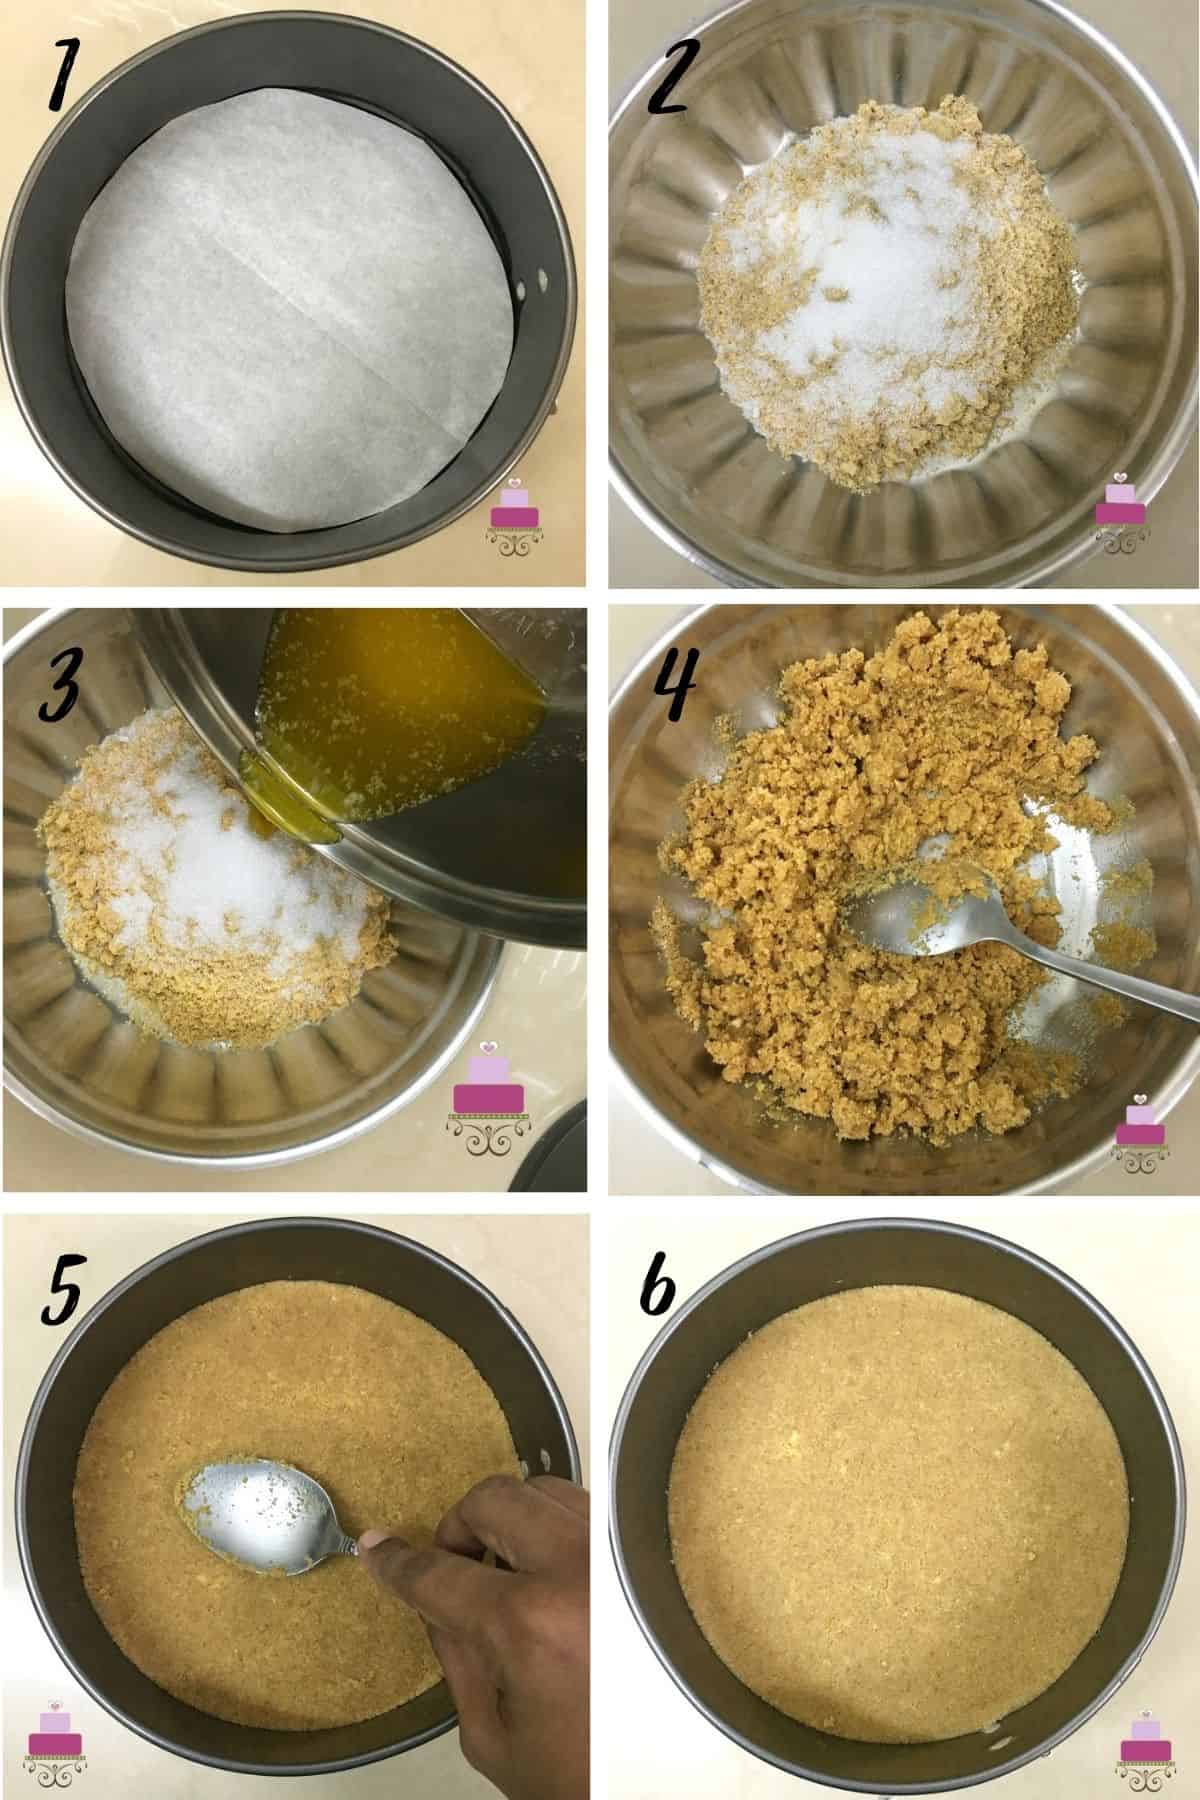 A poster of 6 images showing how to prepare cookie crust for cakes.